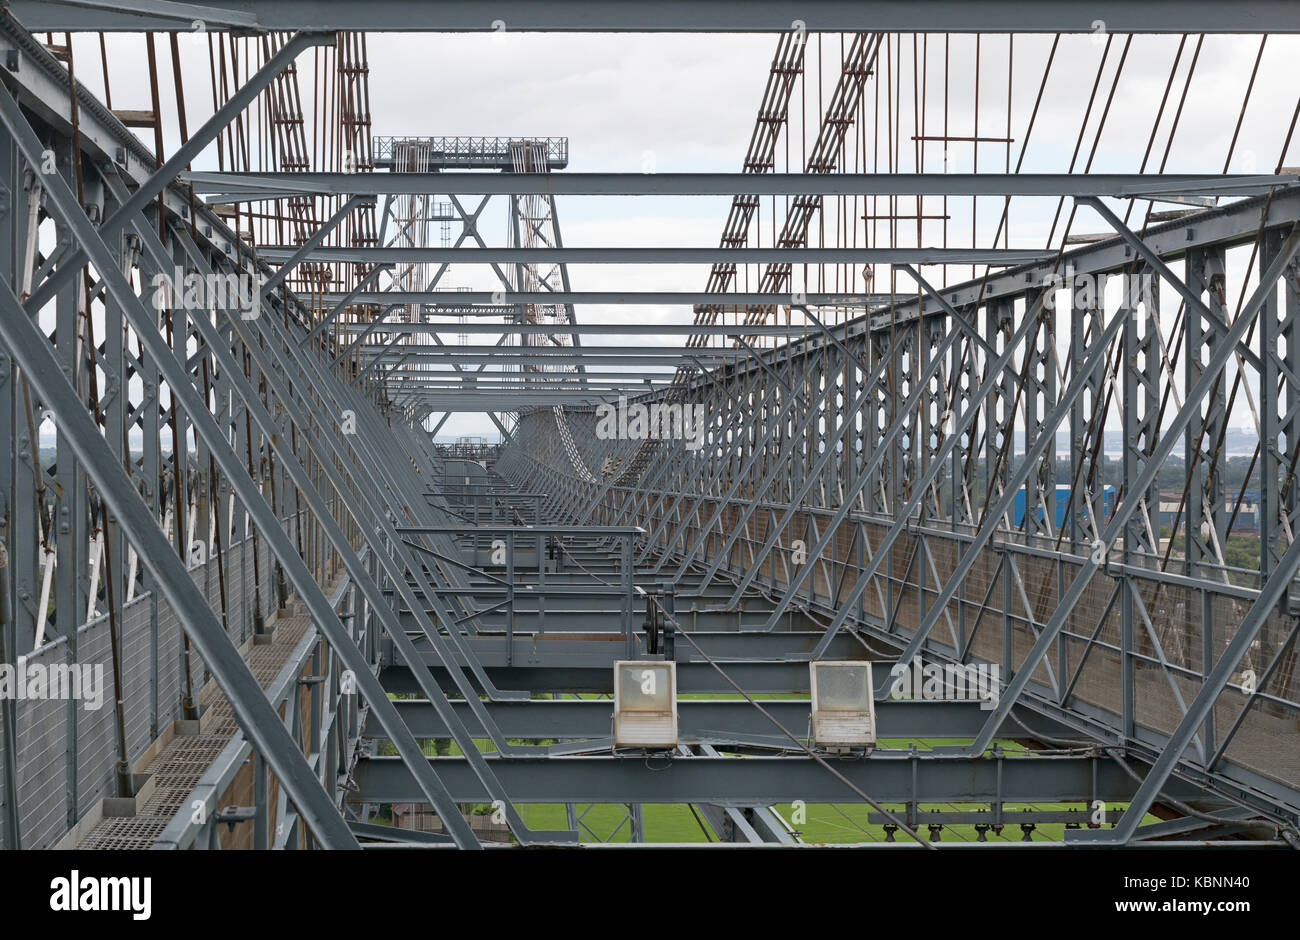 View from western end of upper deck of Newport Transporter Bridge showing pedestrian walkways, cable stays, and suspension cables. Stock Photo